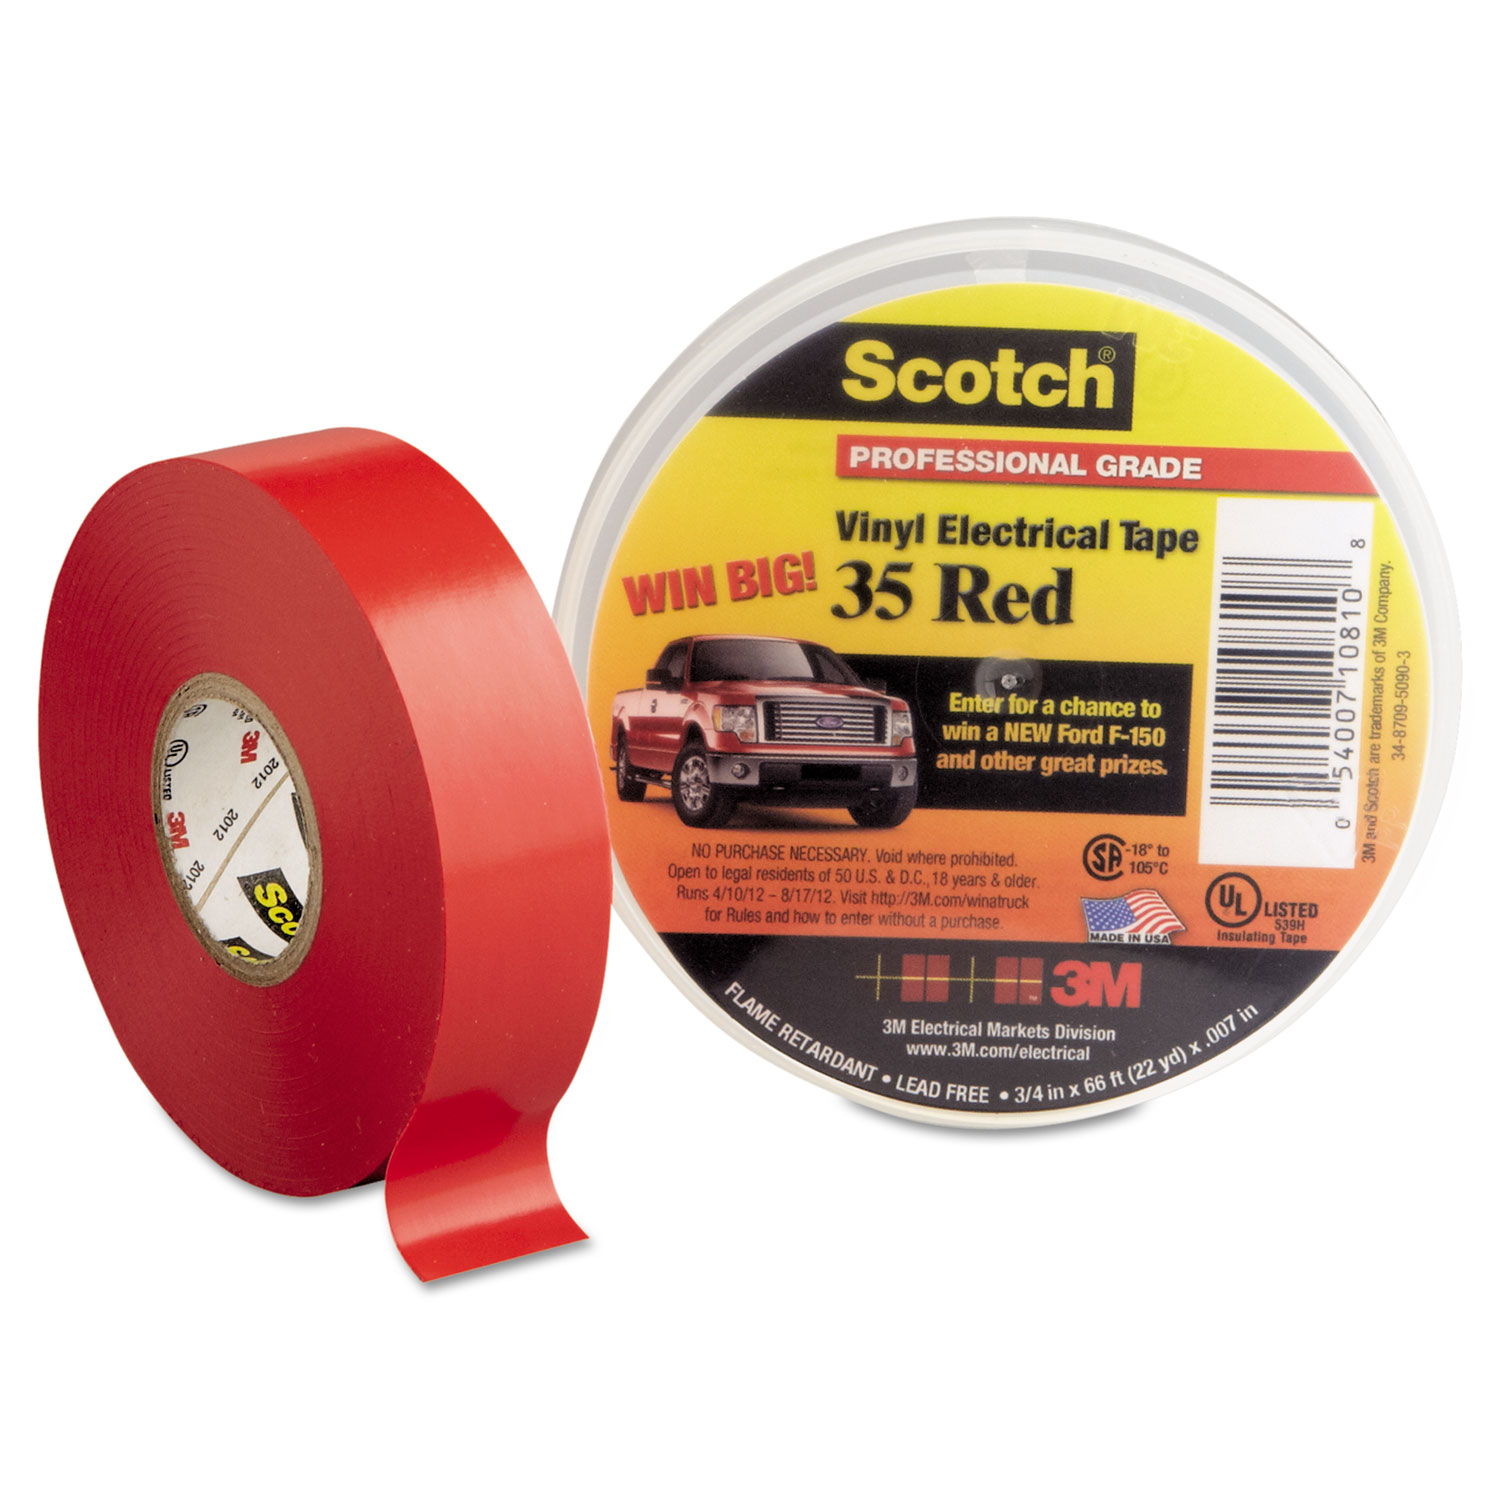 Scotch 35 Vinyl Electrical Color Coding Tape, 3/4 x 66ft, Red